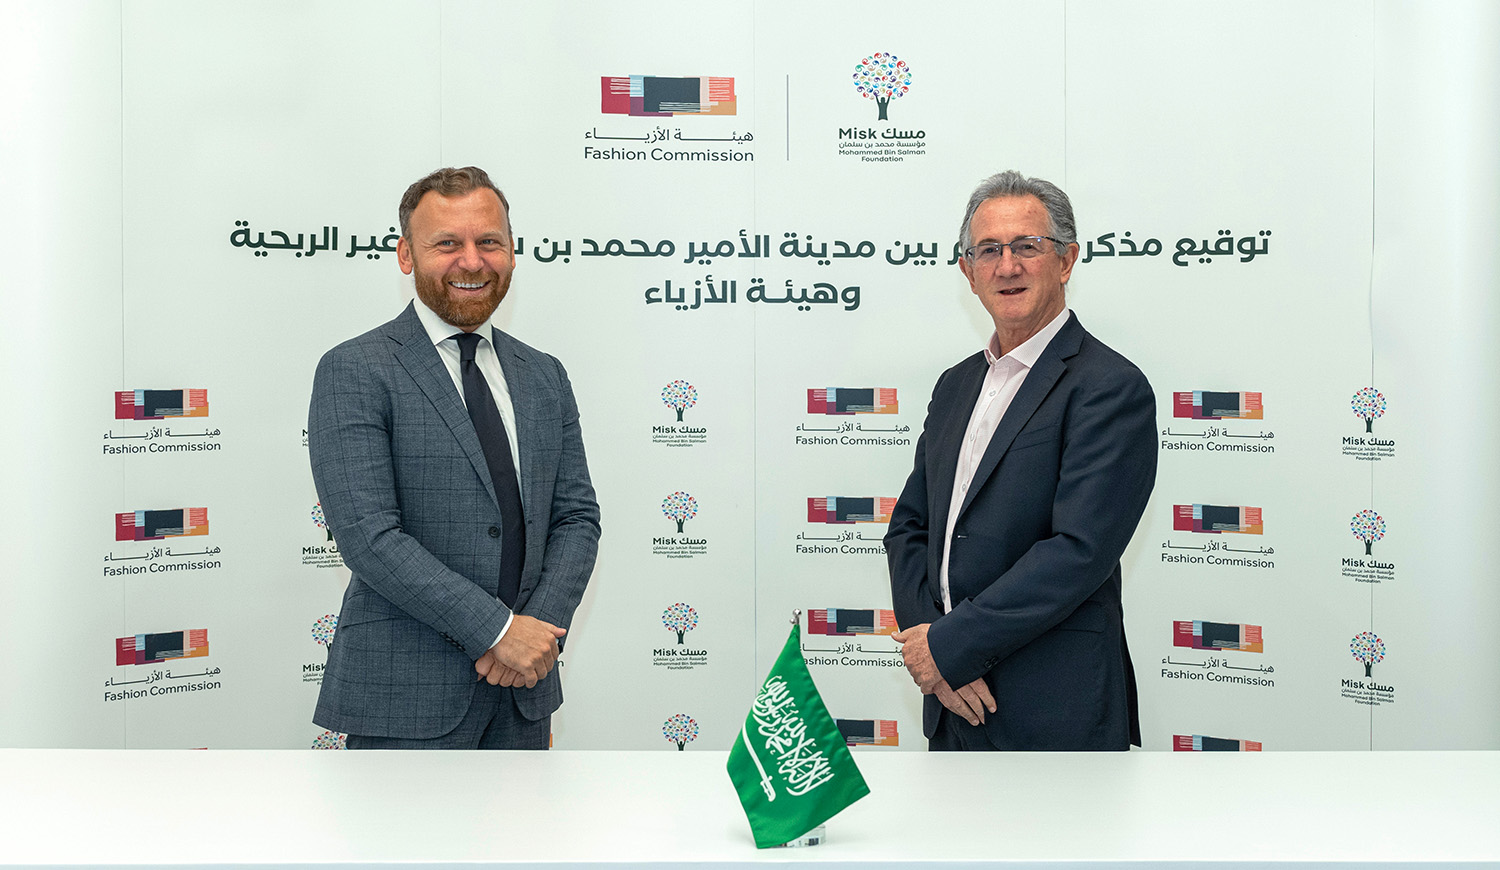 Prince Mohammed Bin Salman Nonprofit City and The Ministry of Culture’s Fashion Commission sign MoU to empower Saudi fashion industry